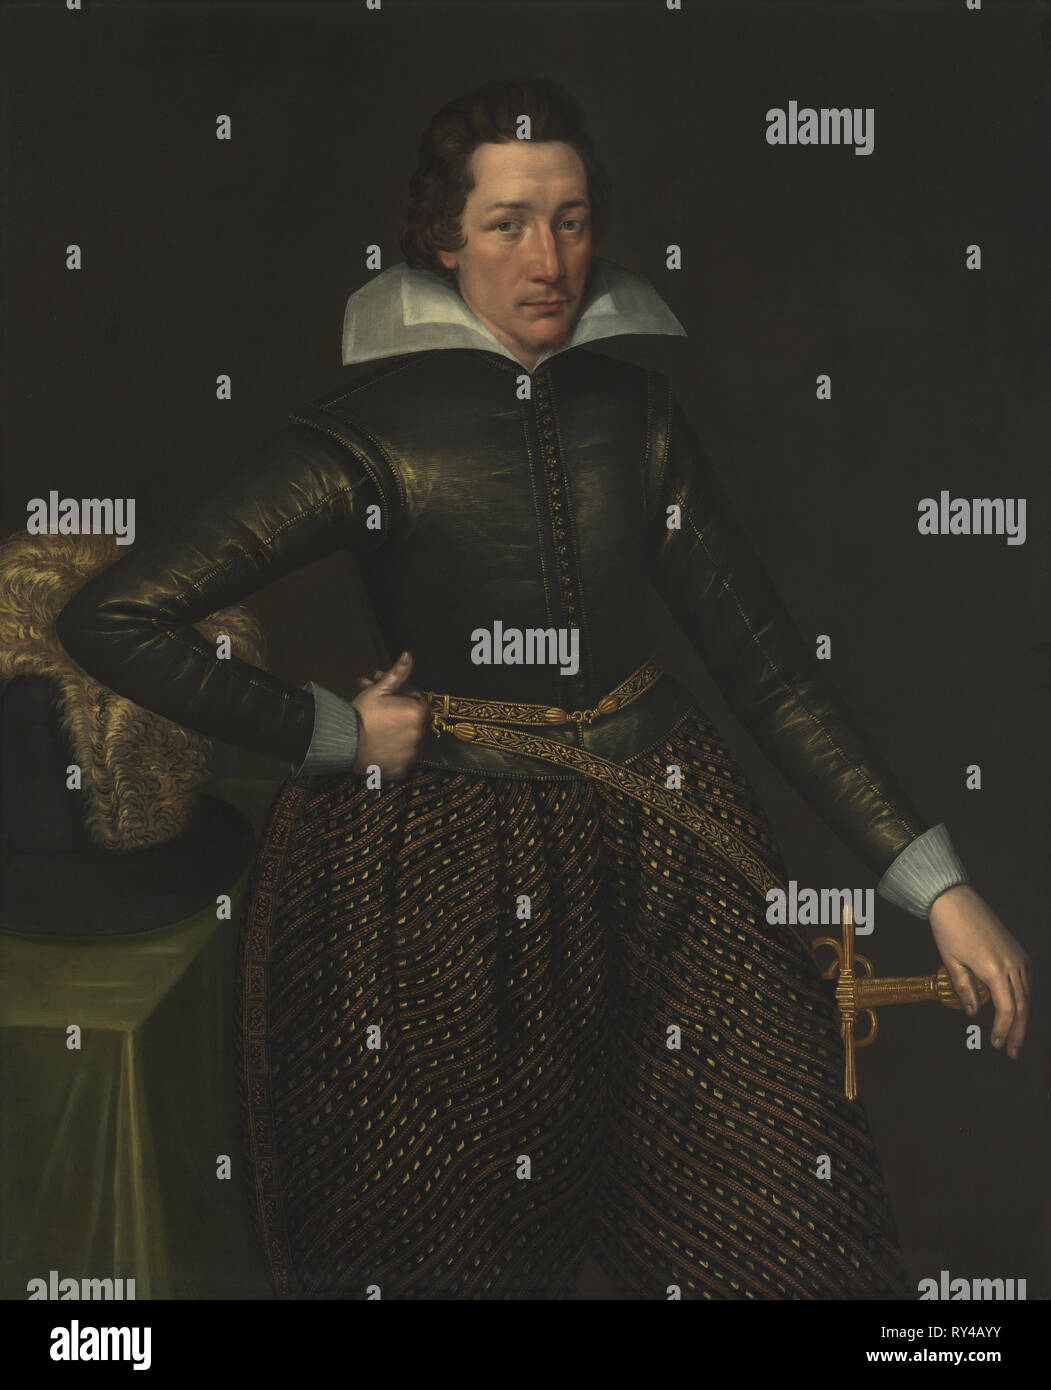 Portrait of a Man, c. 1610. England (Anglo-Dutch), 17th century. Oil on canvas; framed: 142.5 x 120.5 x 6.5 cm (56 1/8 x 47 7/16 x 2 9/16 in.); unframed: 123.2 x 99.8 cm (48 1/2 x 39 5/16 in Stock Photo